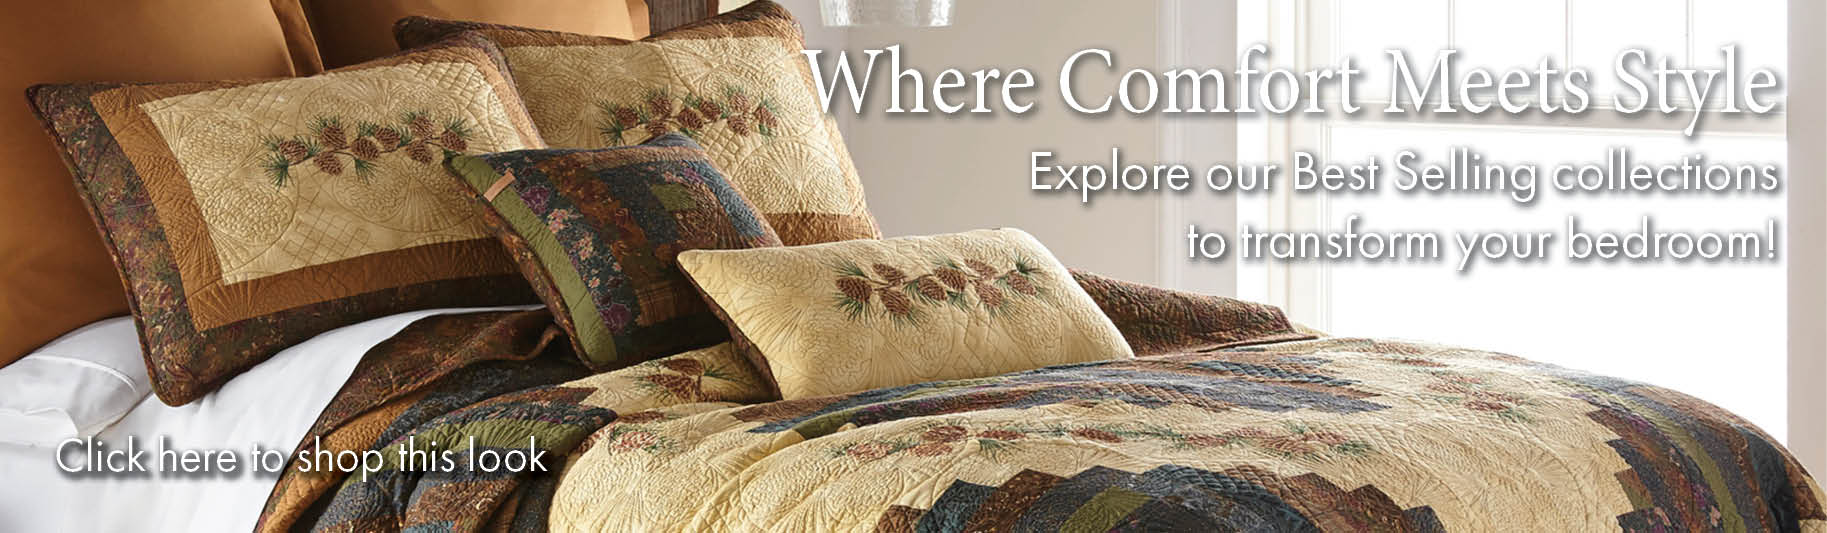 Best Selling Collections by Donna Sharp - Where Comfort Meets Style